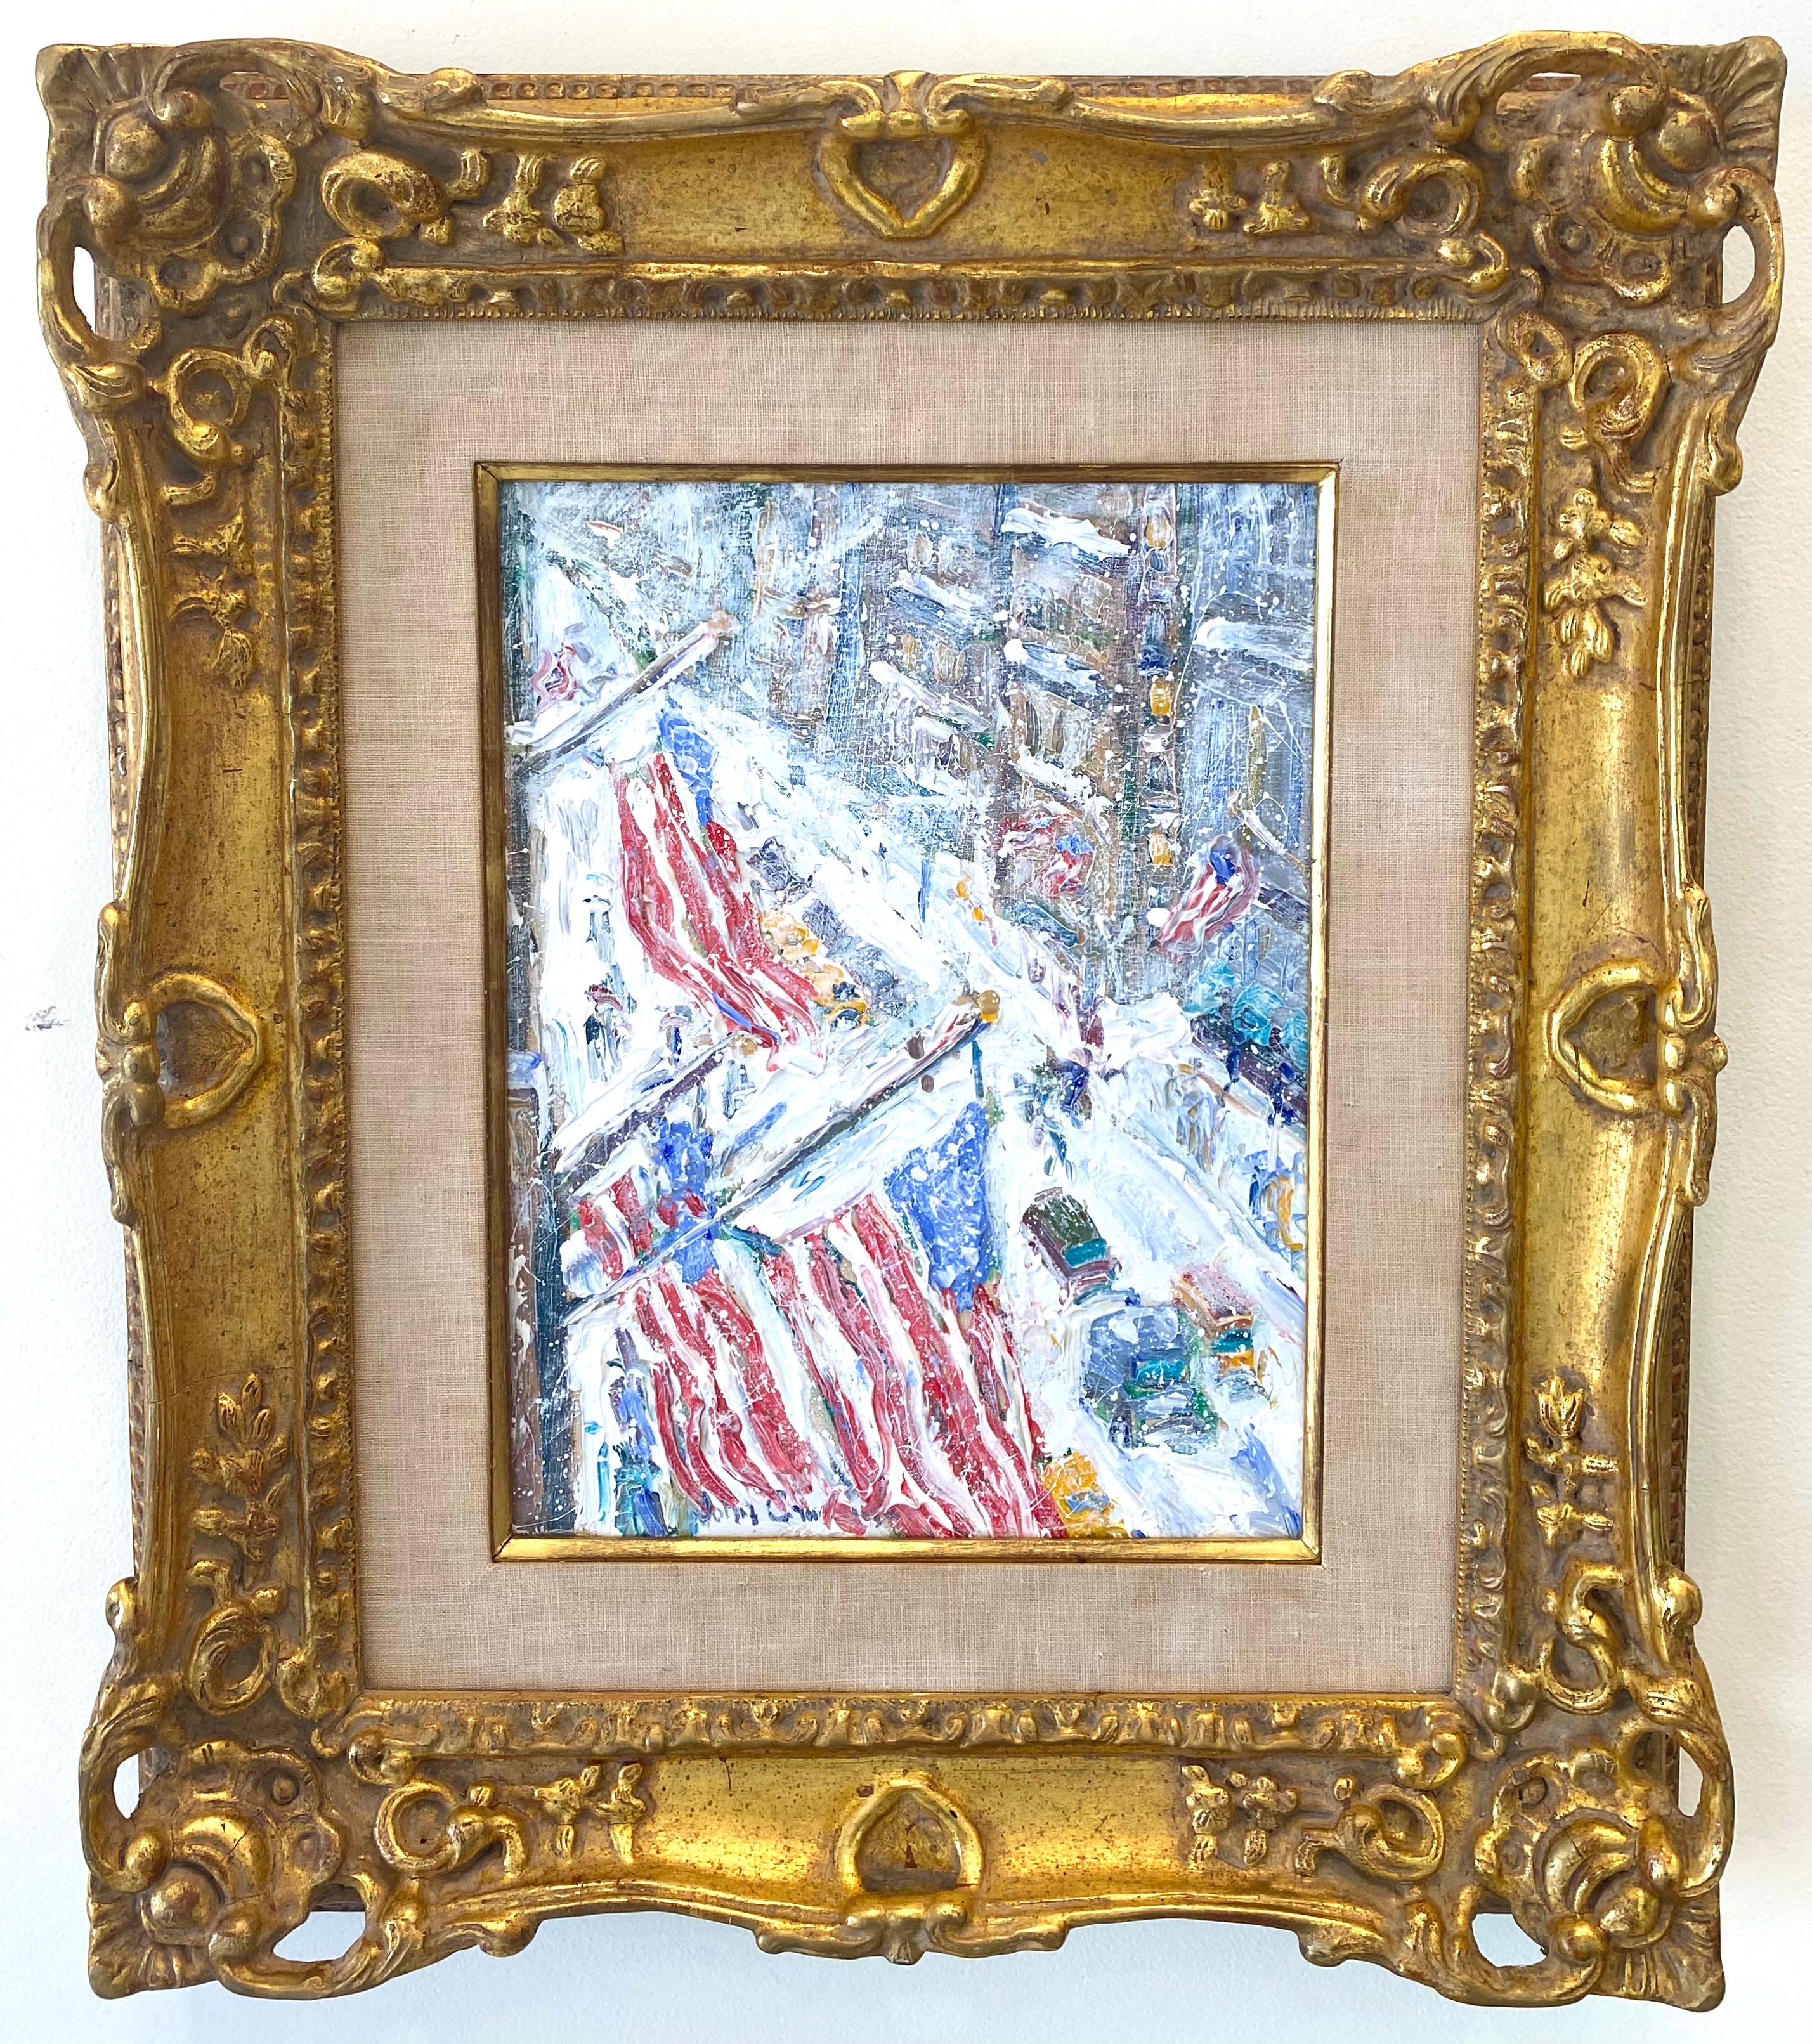 Beautiful, original acrylic on board painting by the well known Hampton artist, John Crimmins. Signed lower left. Condition is excellent.  The scene depicts Fifth Avenue in New York City on a snowy evening with flags flying and snow swirling. Framed